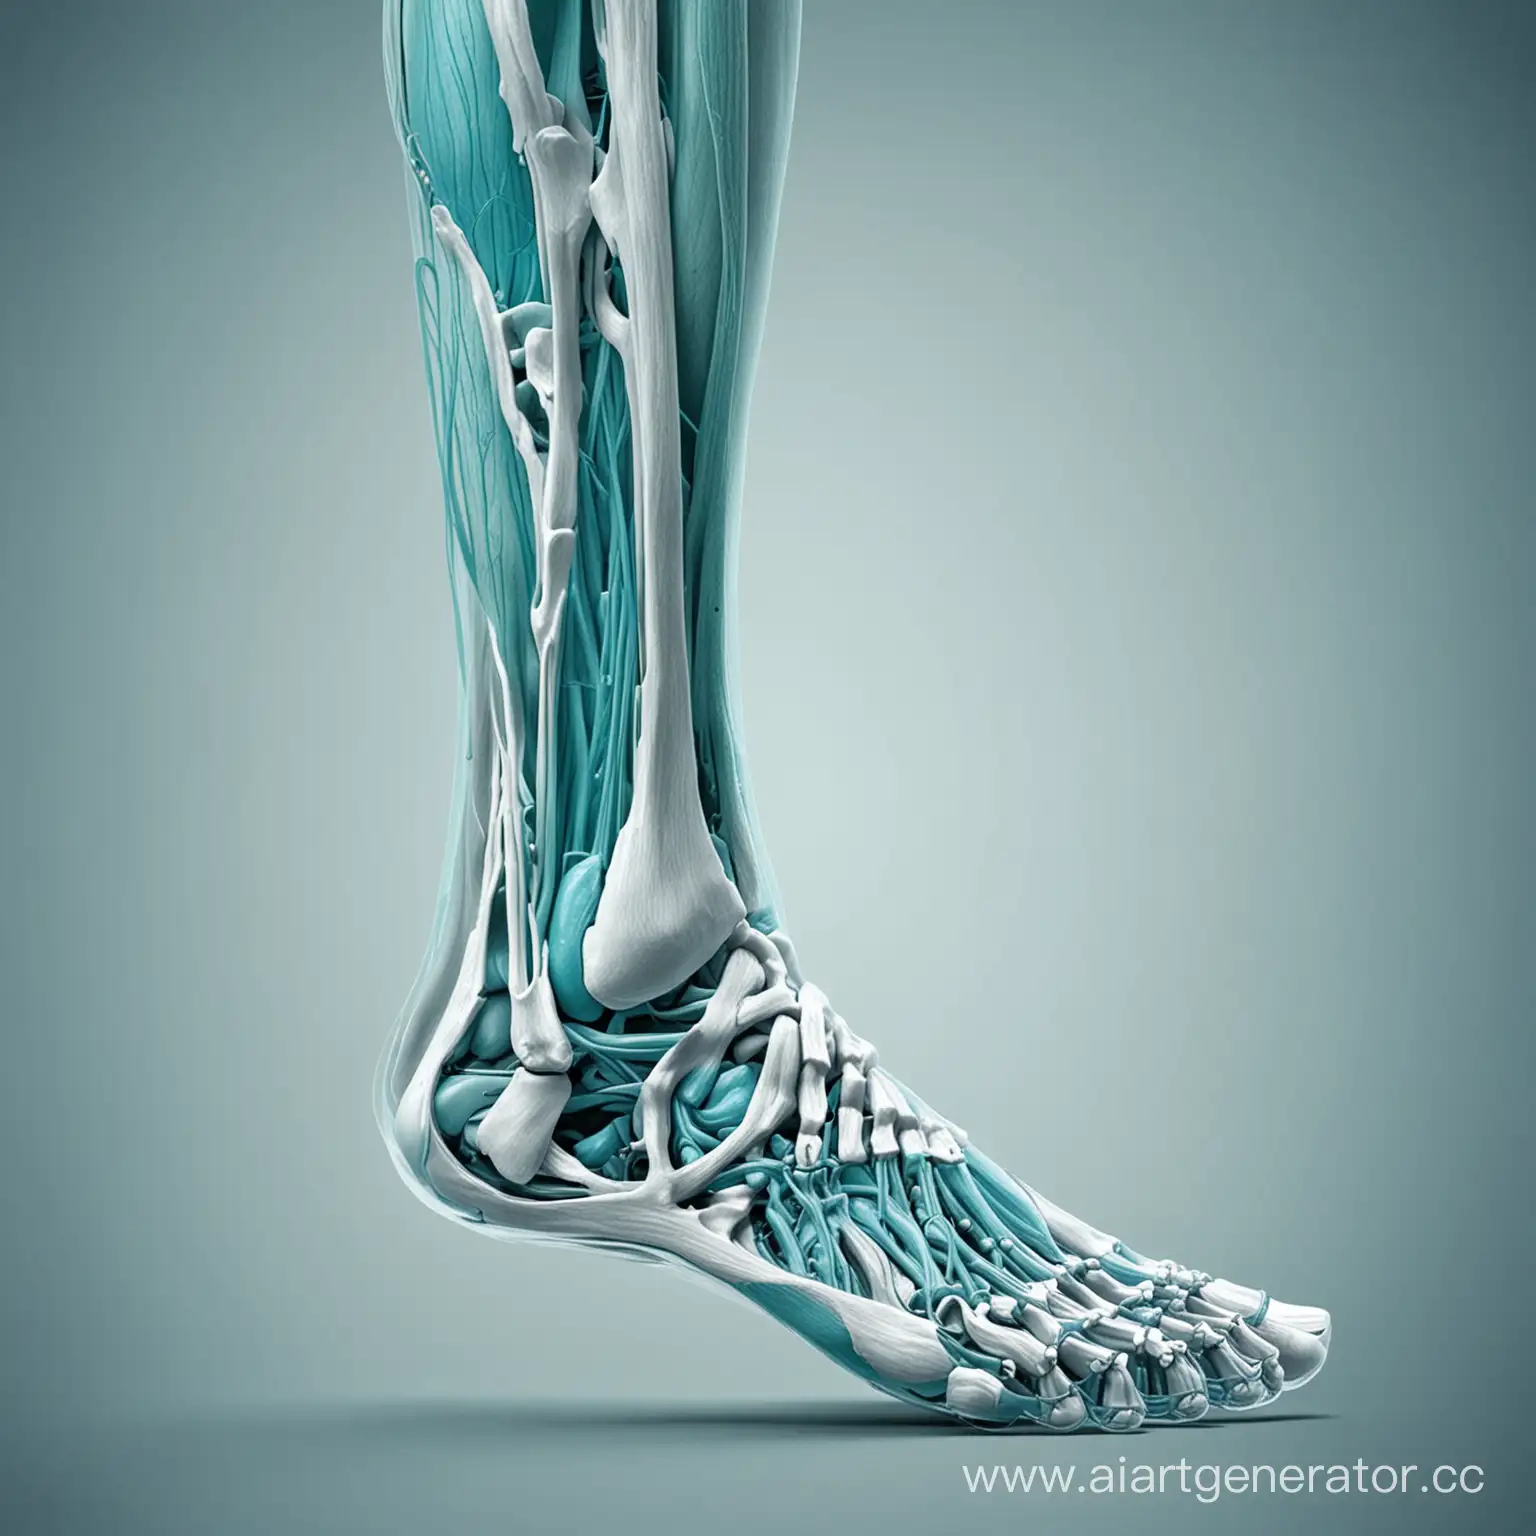 Anatomical-Illustration-of-Ankle-Muscles-and-Bones-in-Blue-Turquoise-Tones